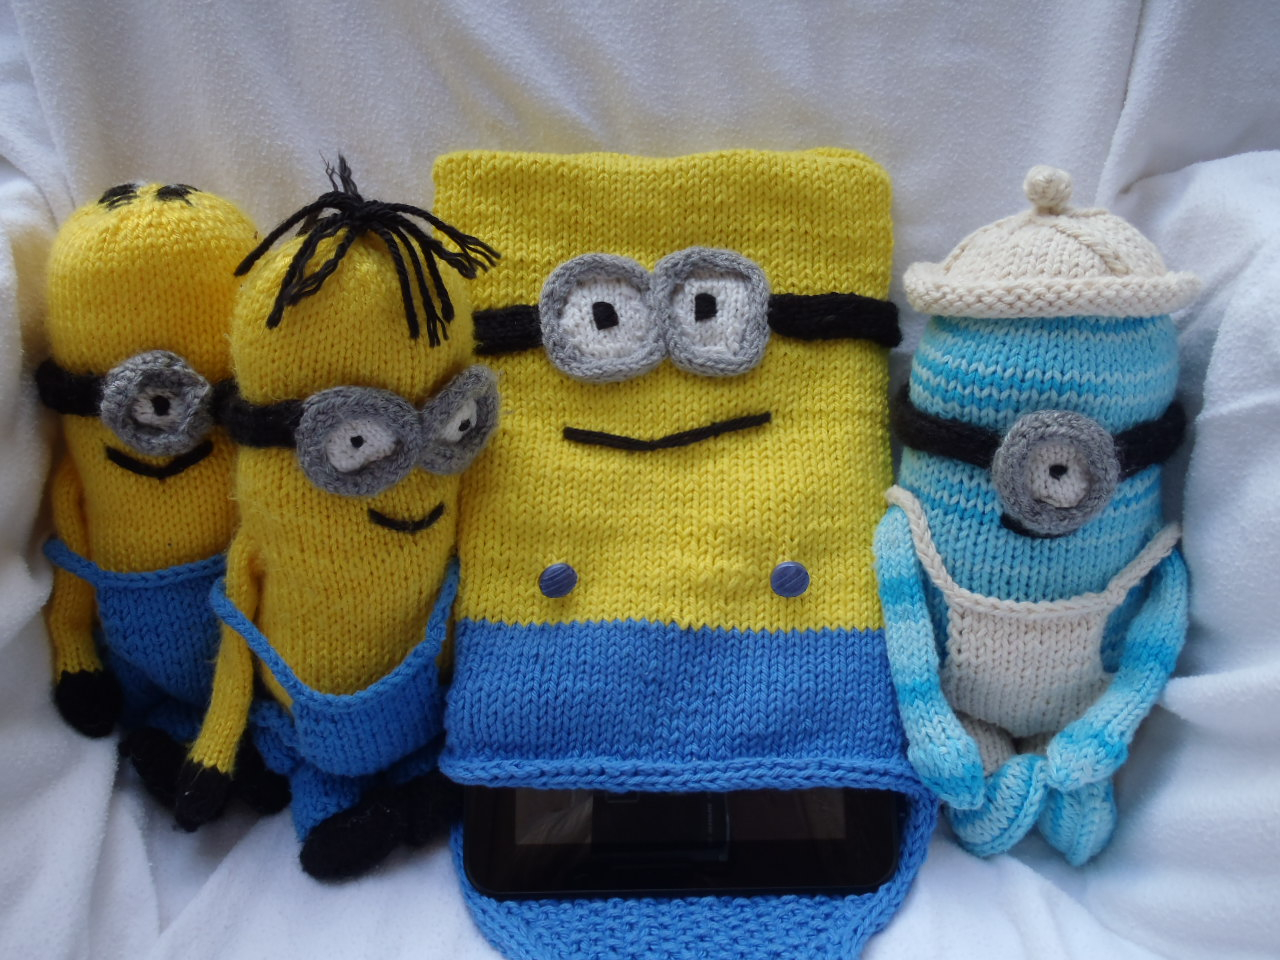 Knitting Patterns For Minions Stanas Critters Etc Knitting Pattern For Minions Tablet Or I Pad